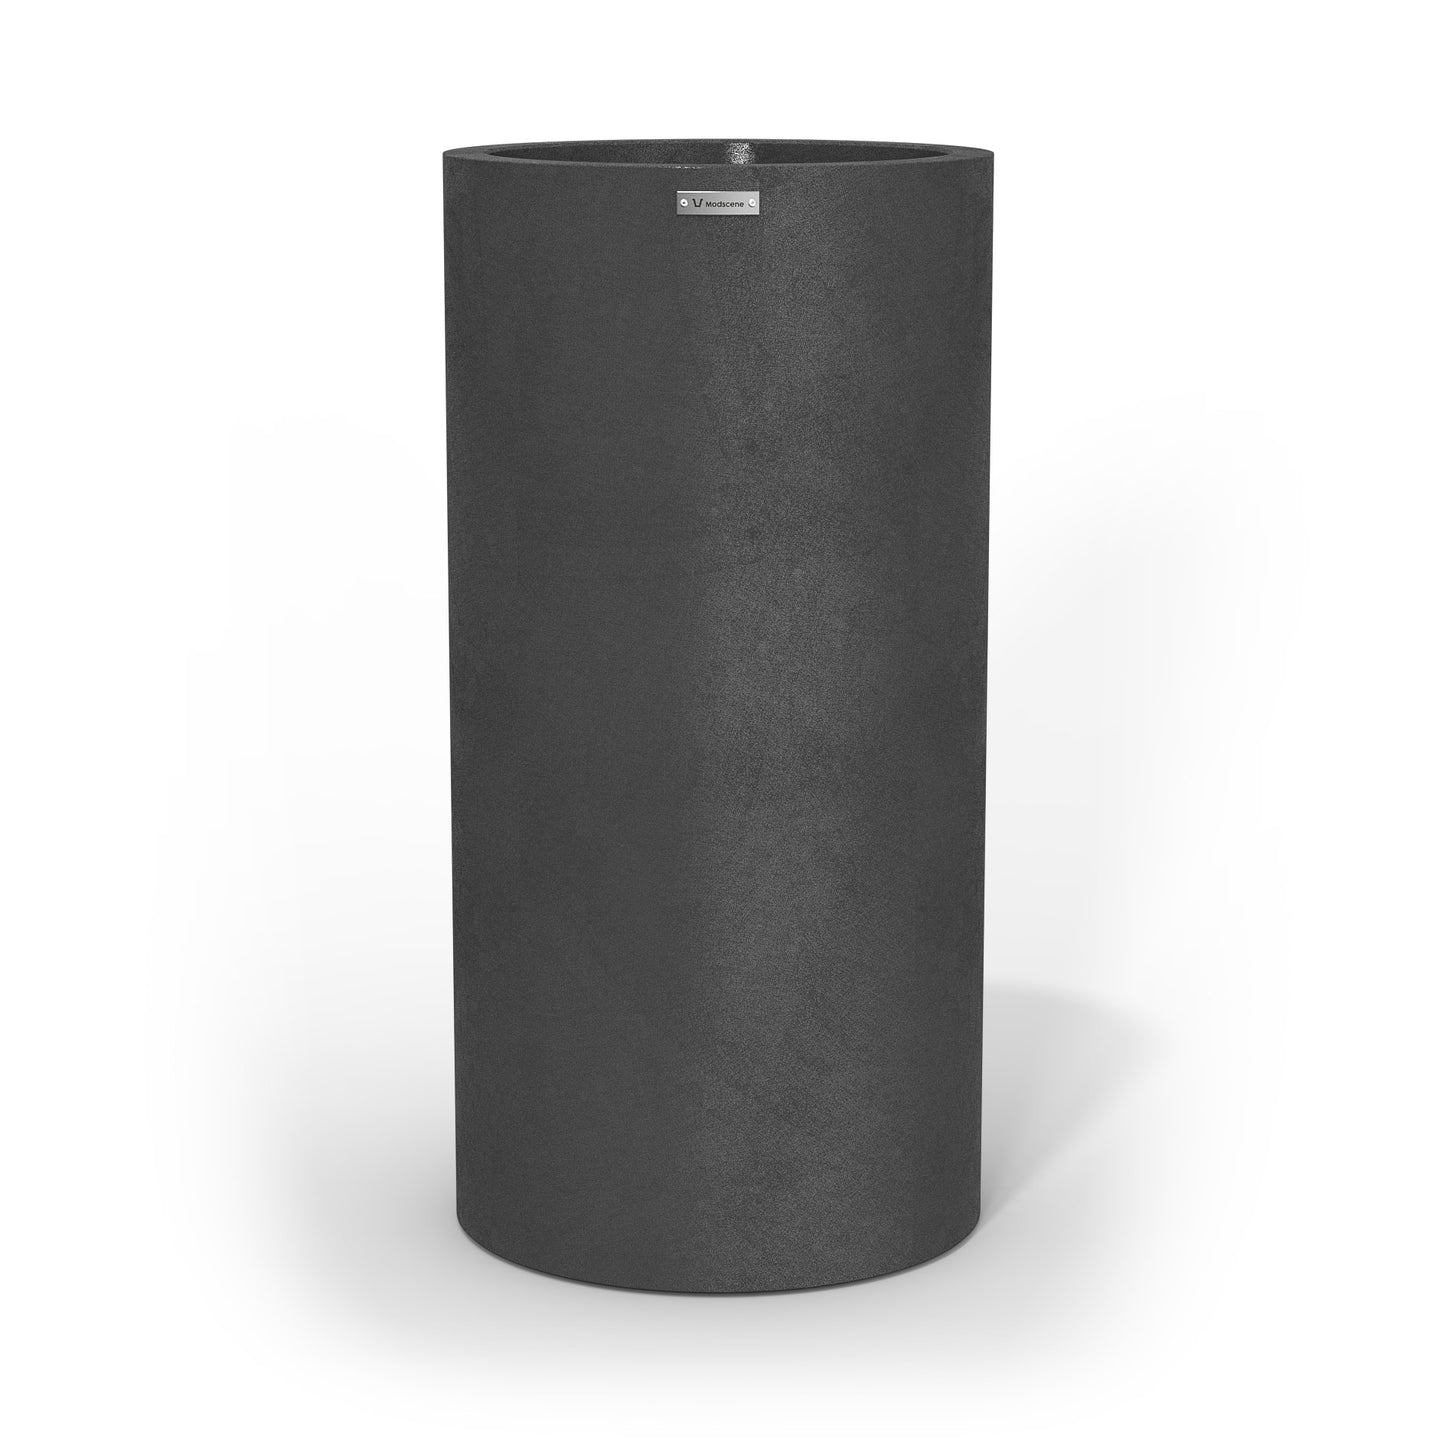 A tall cylinder planter pot in a brushed grey colour made by Modscene NZ.